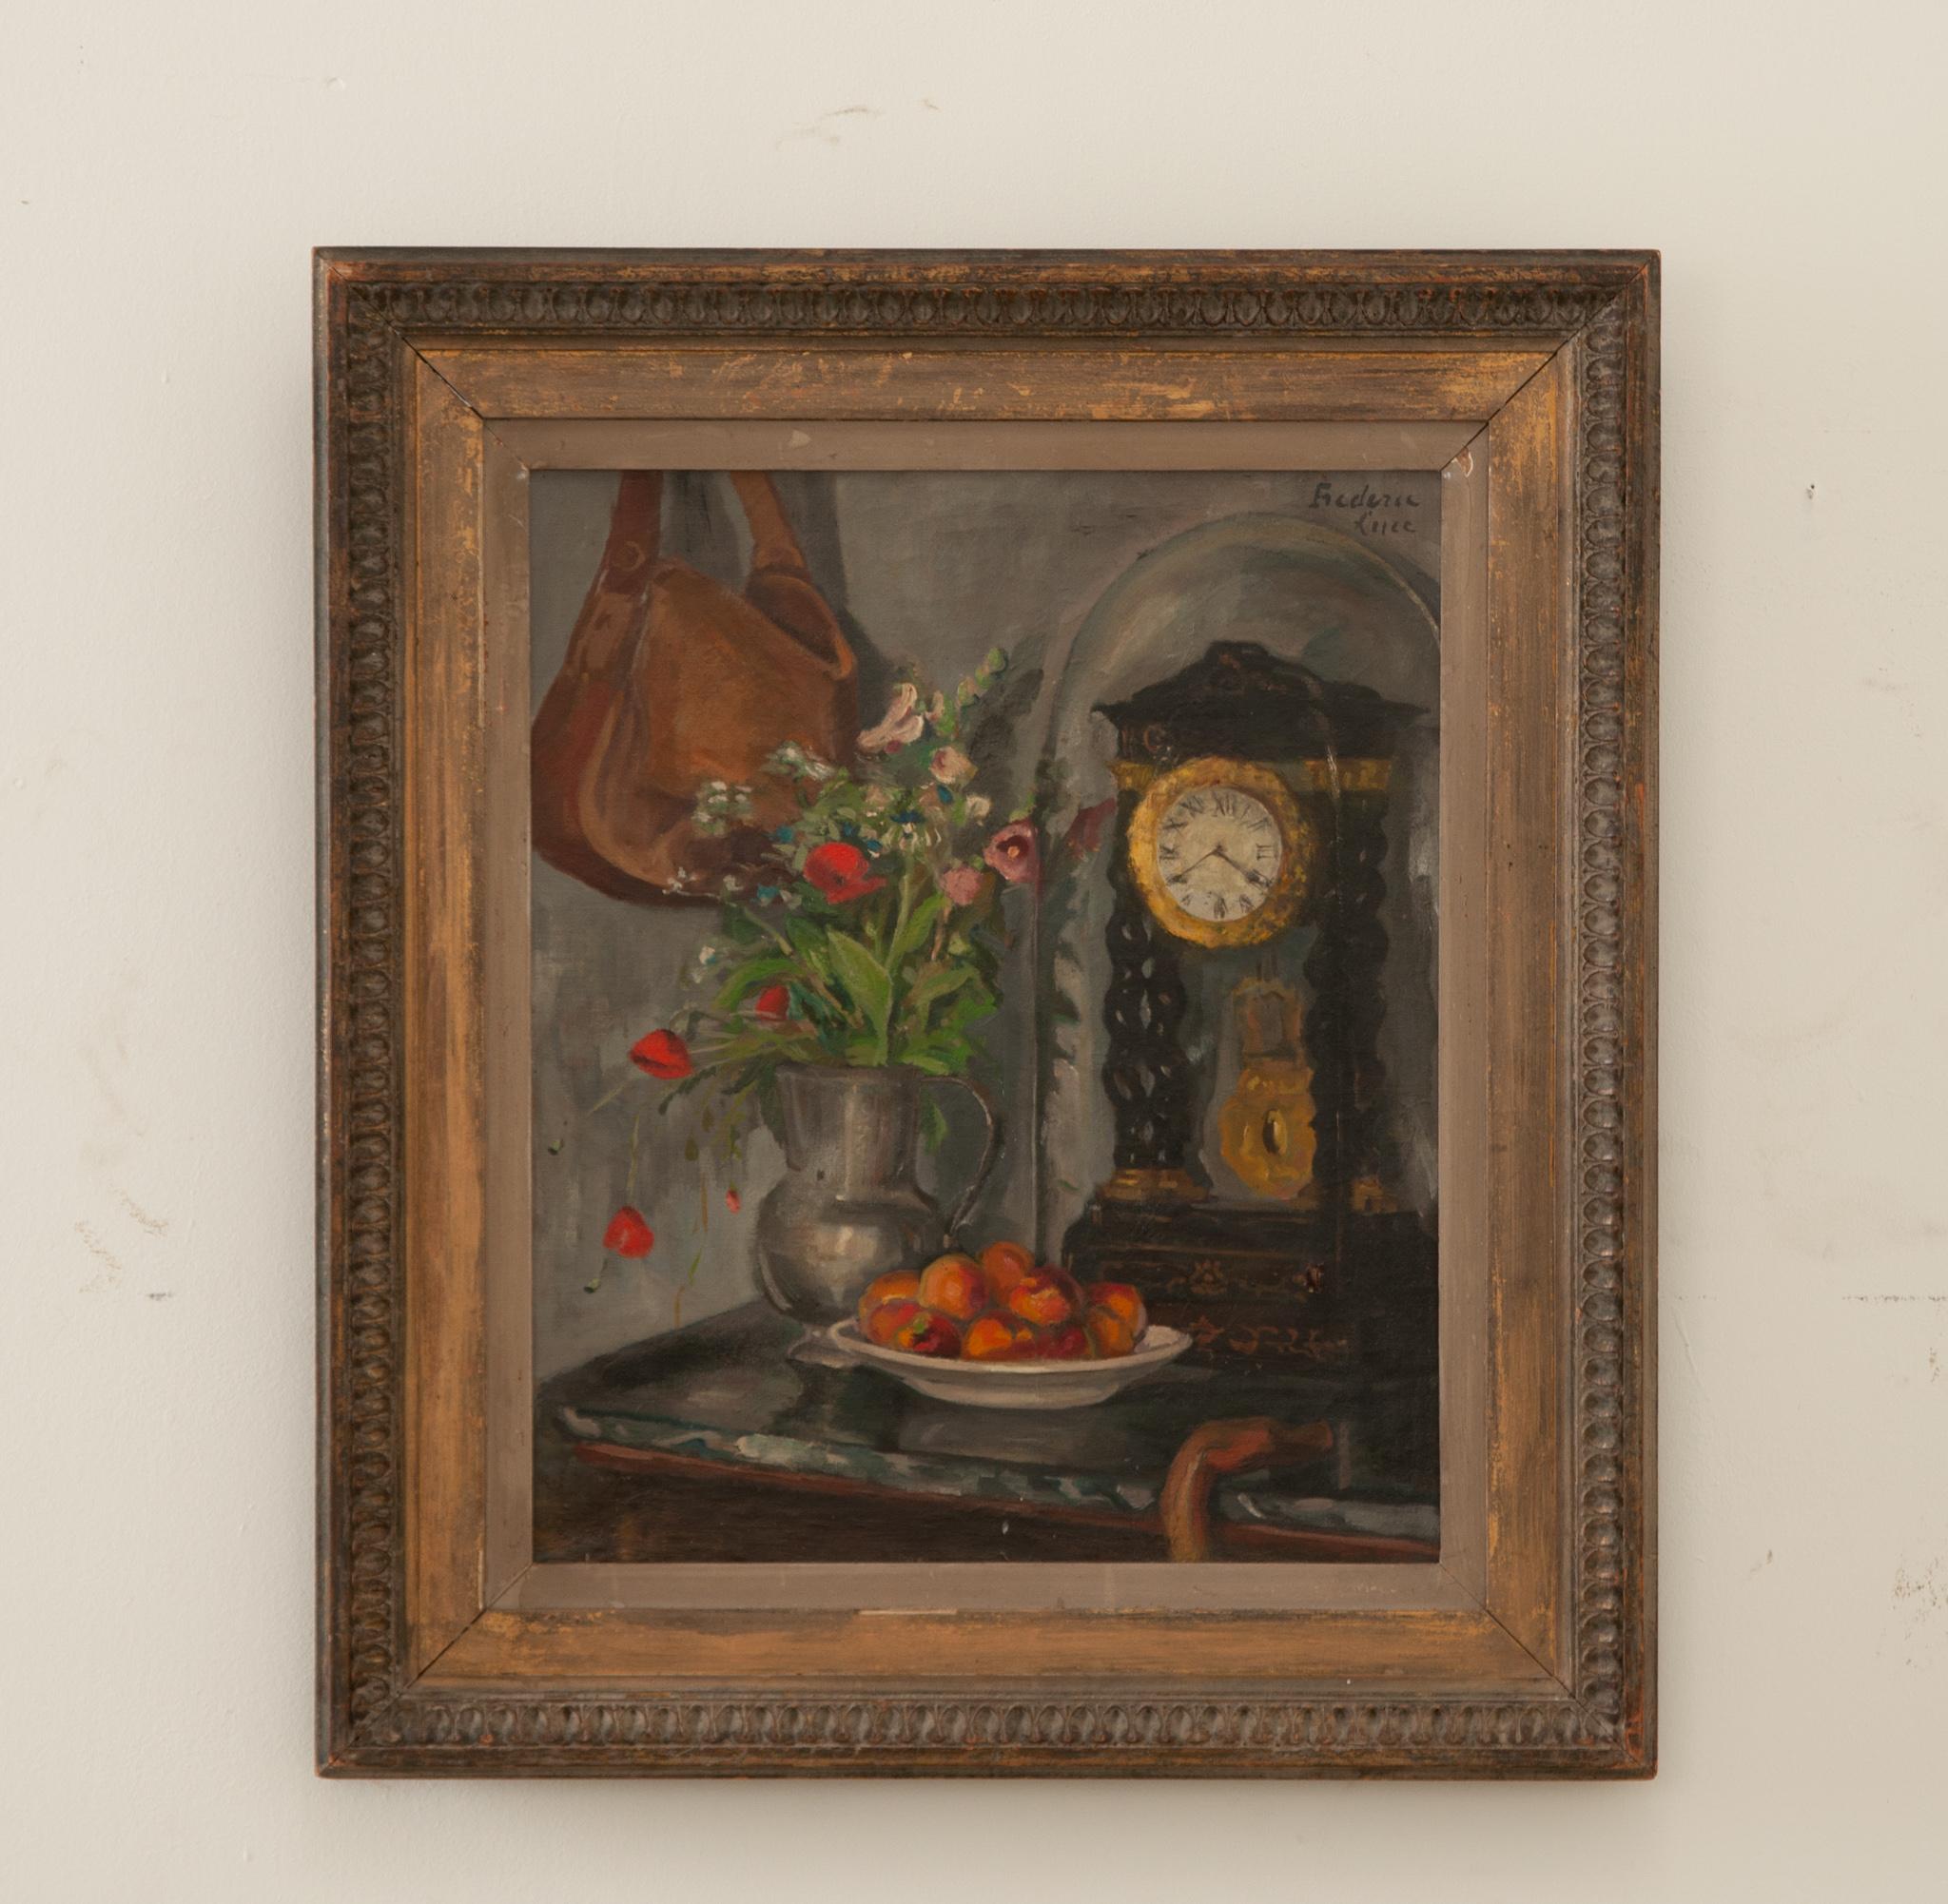 An Impressionist style antique oil painting from 19th century France. This work exhibits an array of attractive objects on a marble tabletop. The viewer's eye is drawn first to a handsomely rendered bowl of fruit in front of a silver pitcher of